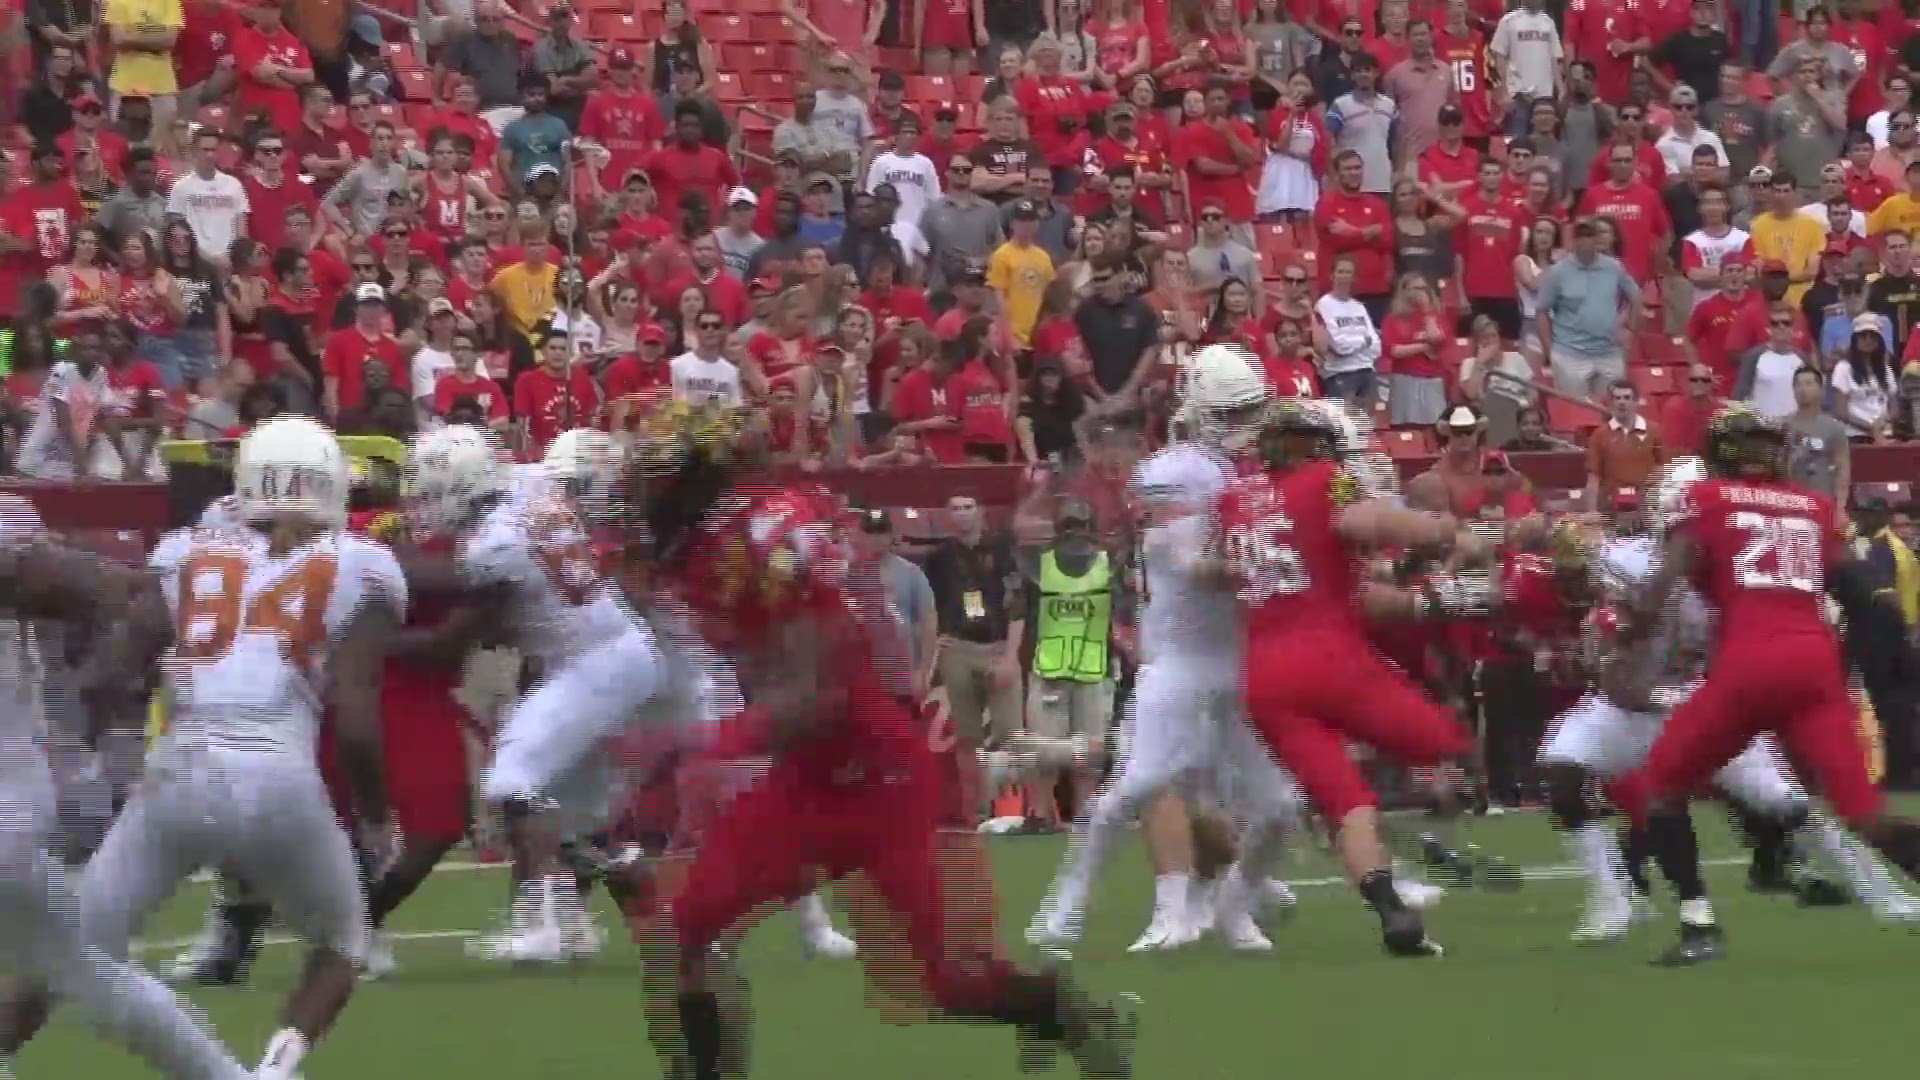 Texas lost its season opener to Maryland 29-34. Here are the highlights